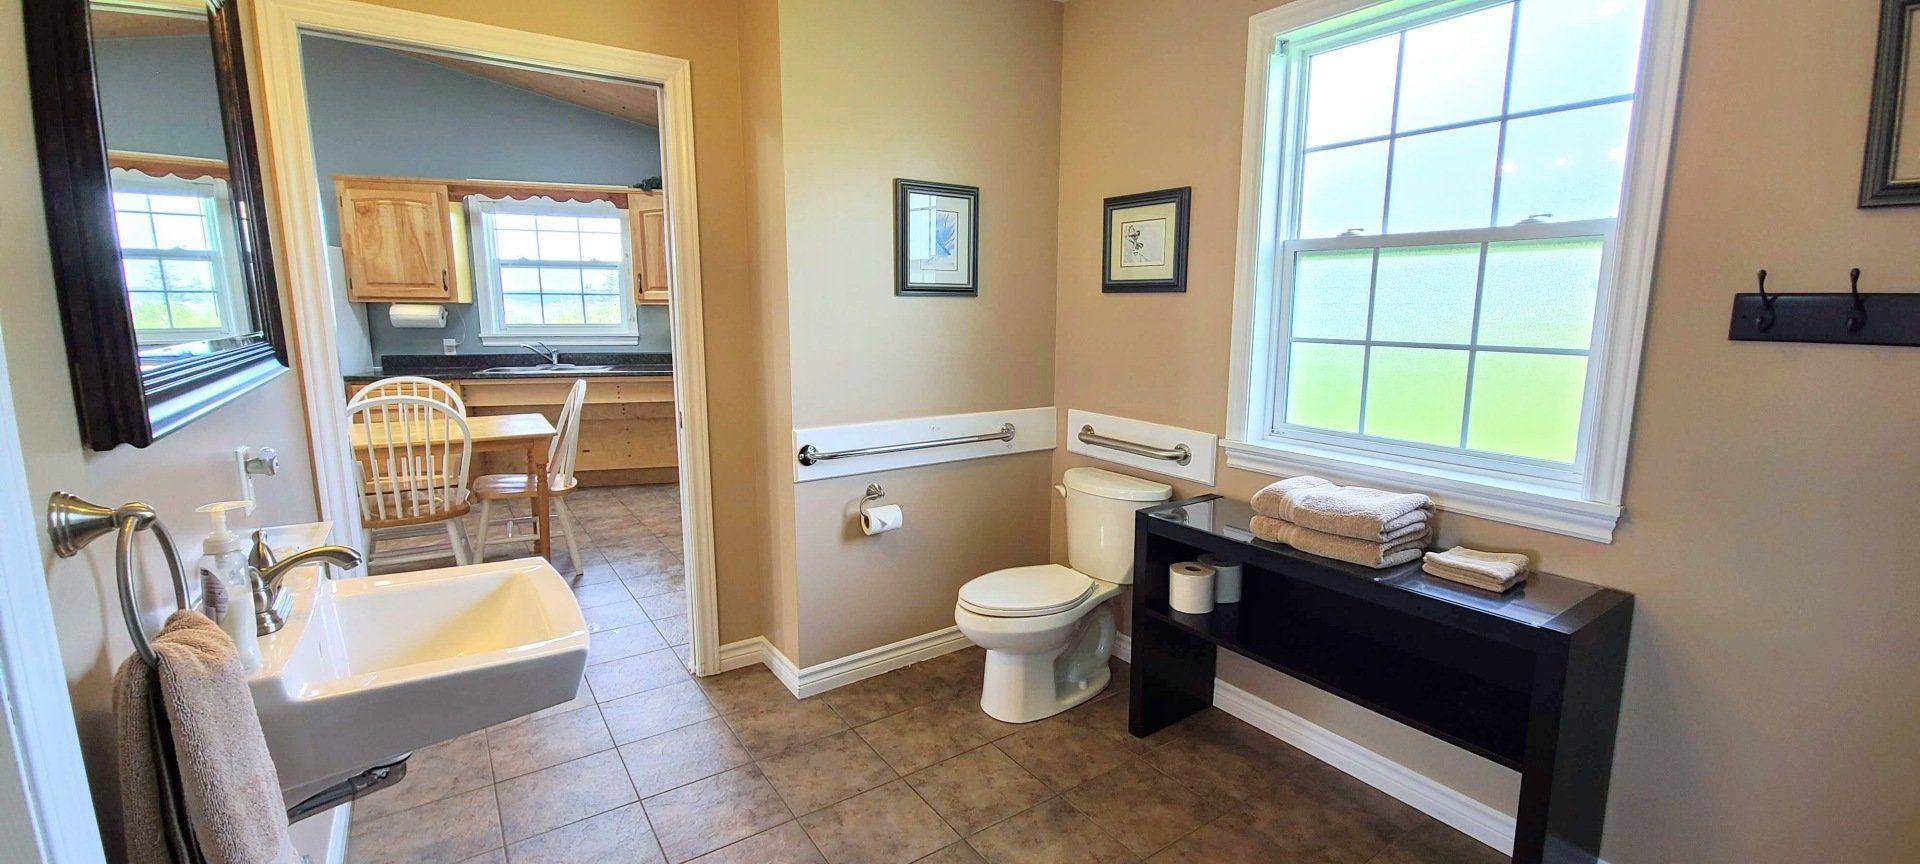 barrier free bathroom with toilet that has grab bars beside and behind it